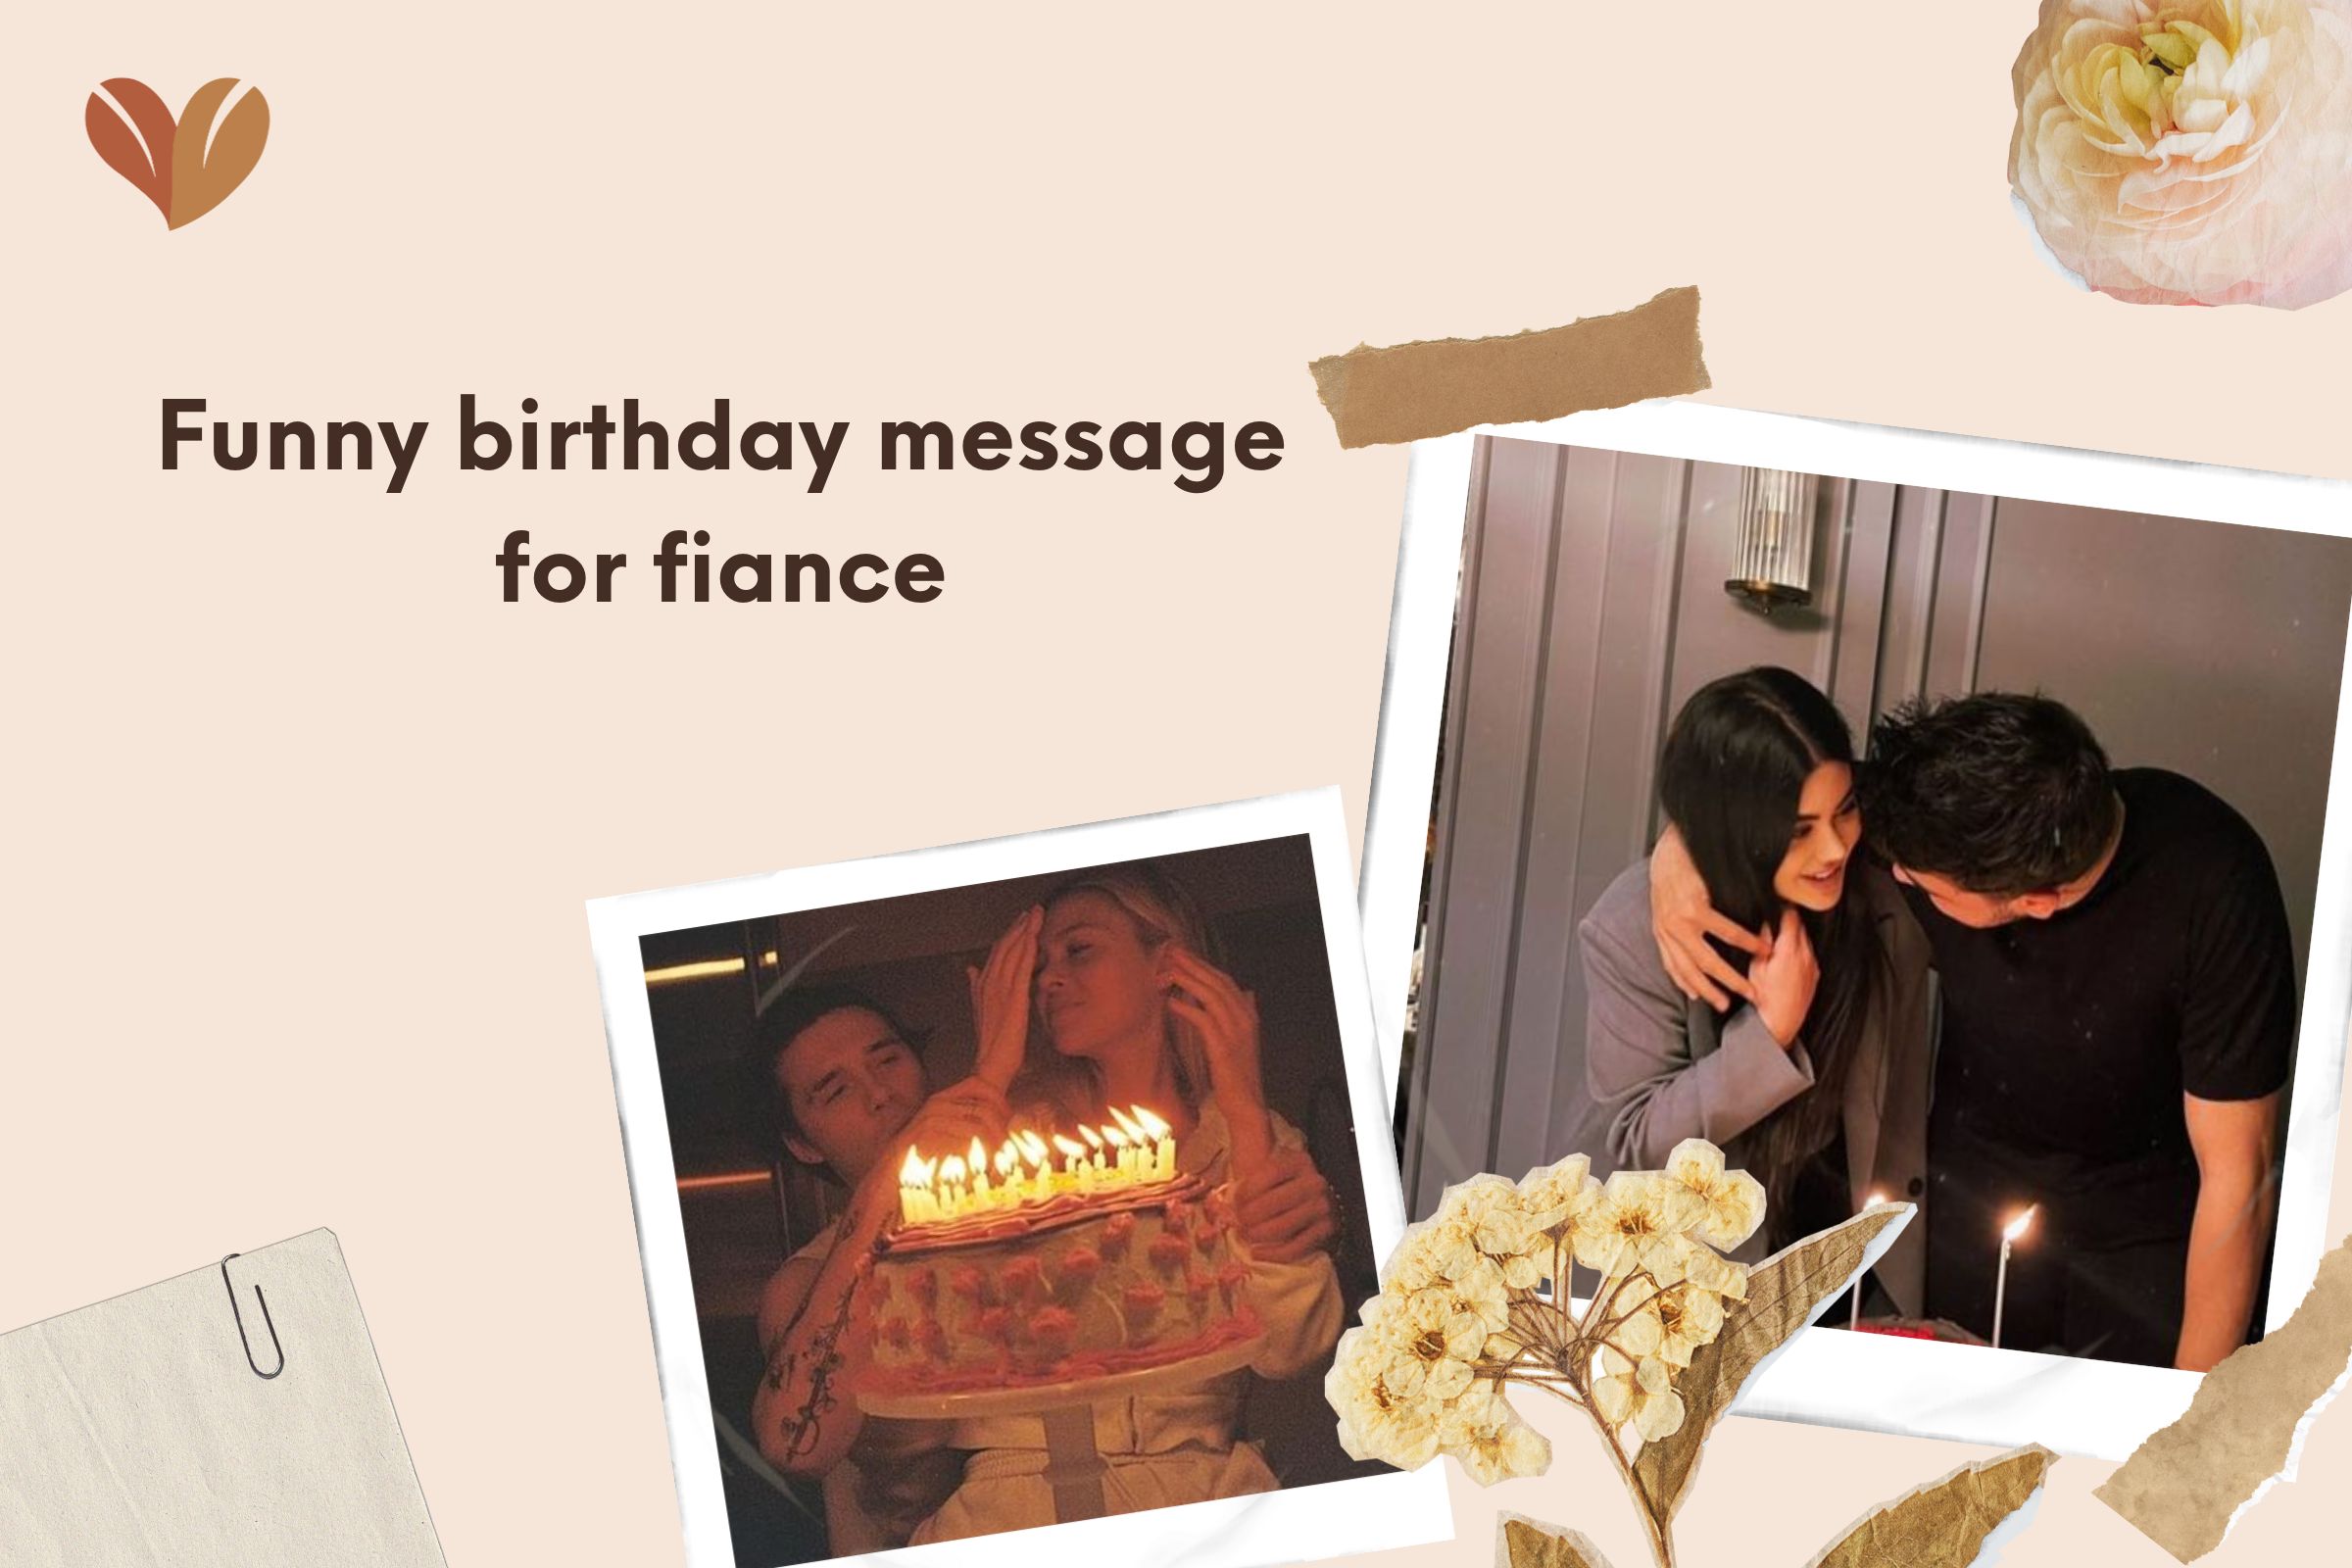 Funny birthday message for fiance